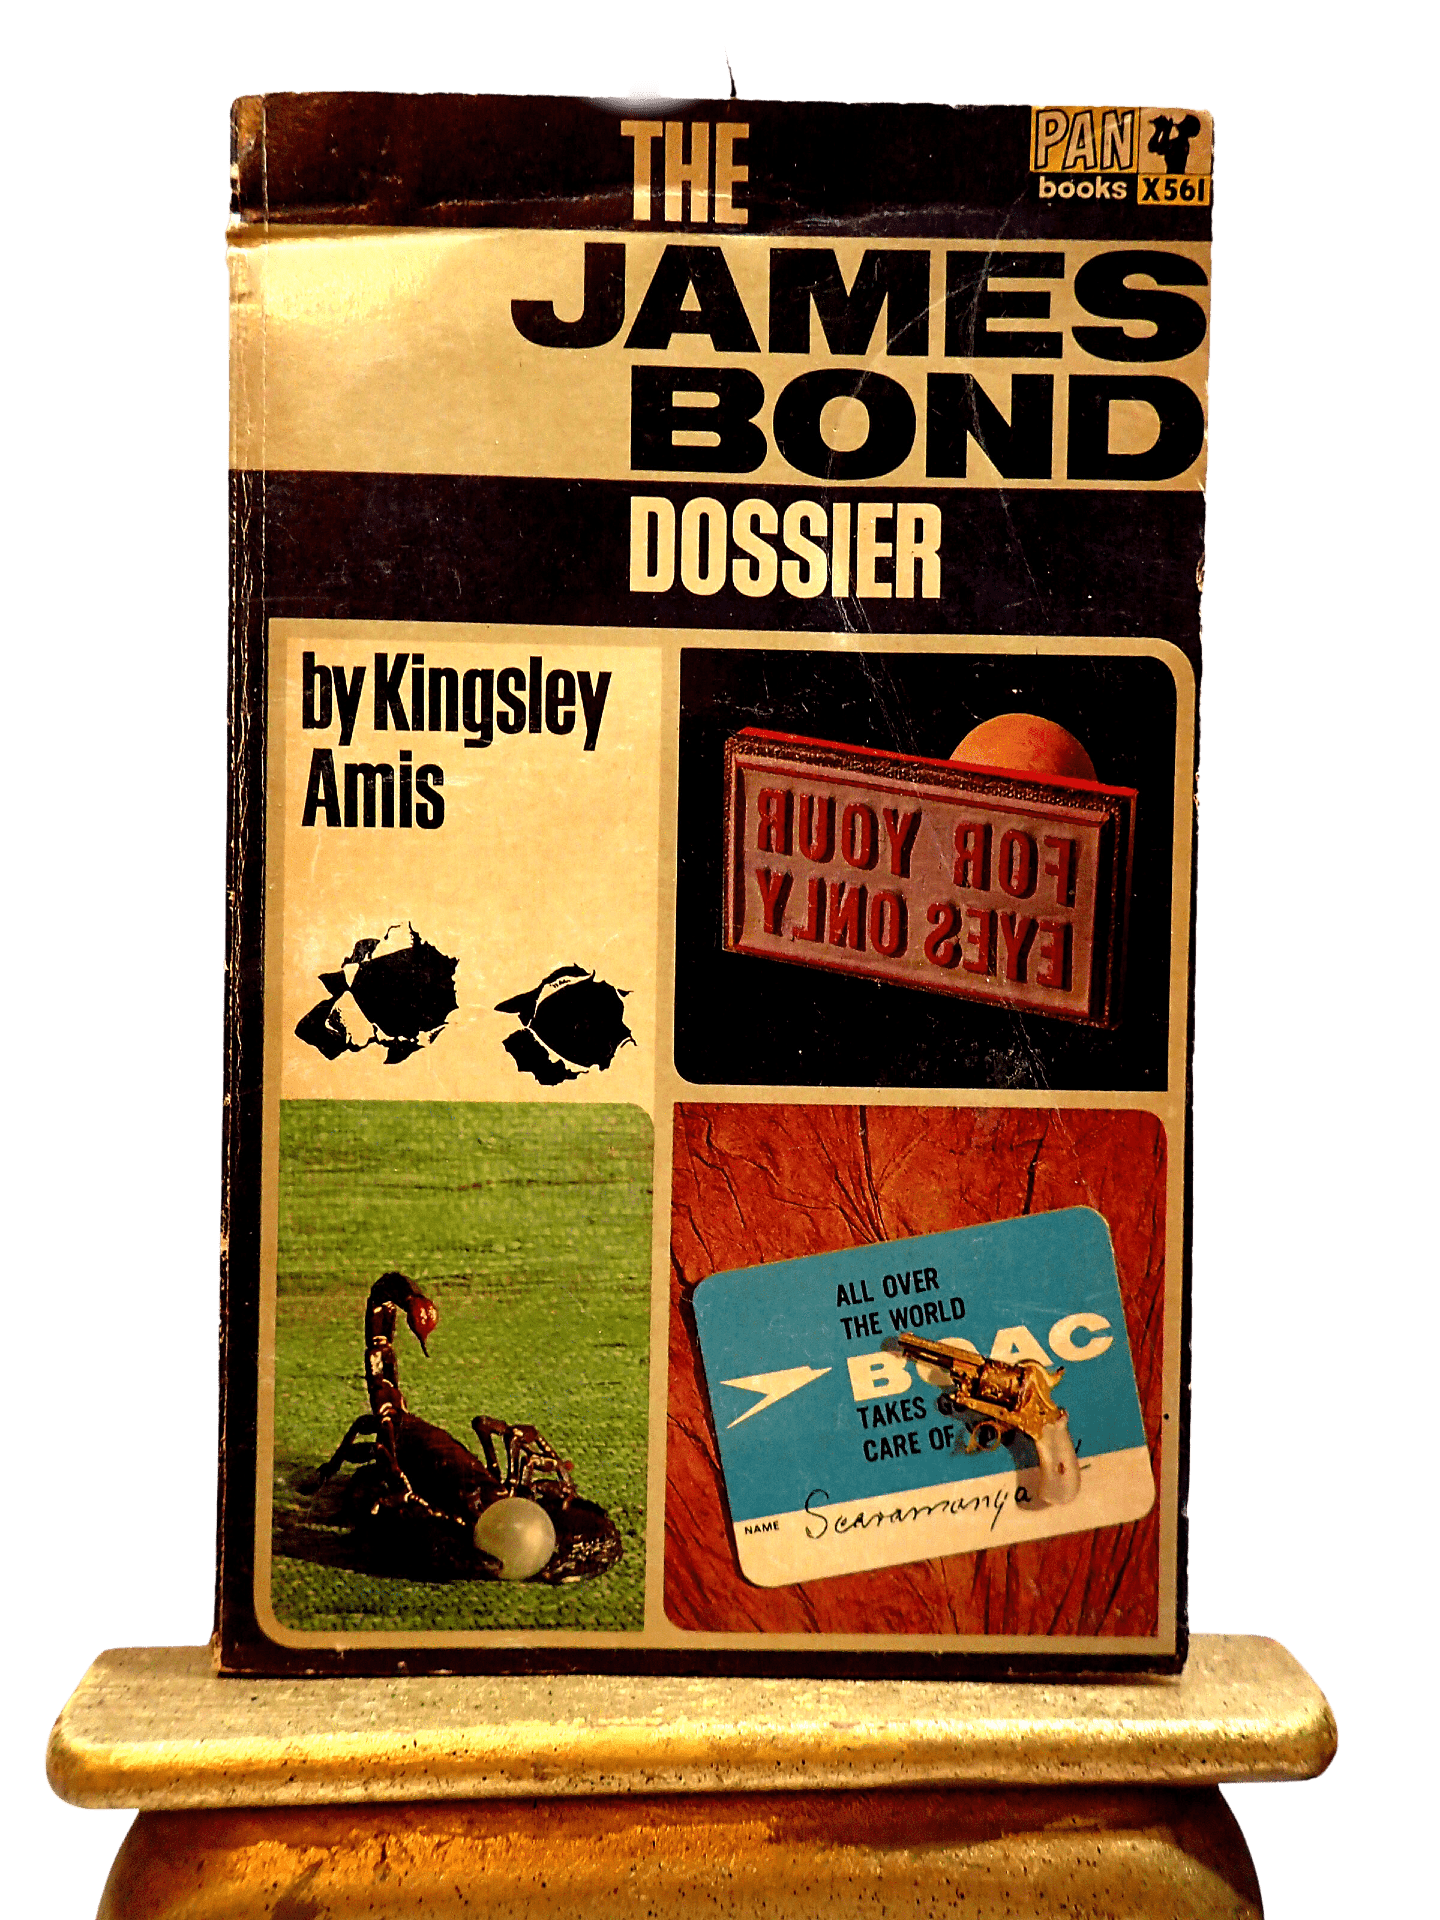 The James Bond Dossier Kingsley Amis First Edition 007 Pan Paperback Book 1966